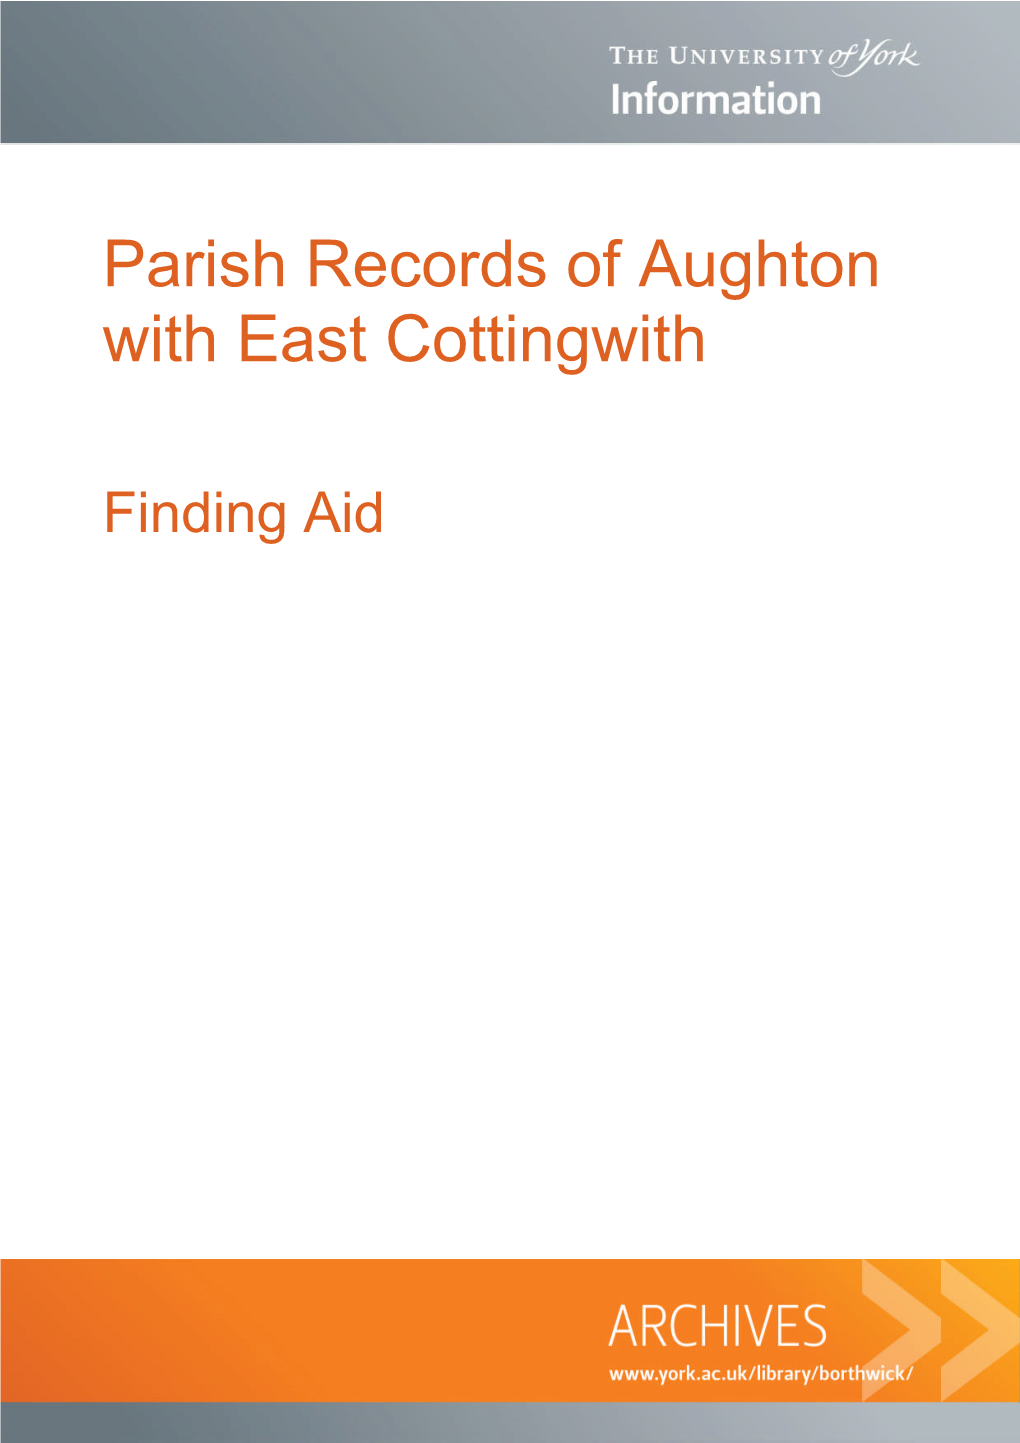 Parish Records of Aughton with East Cottingwith